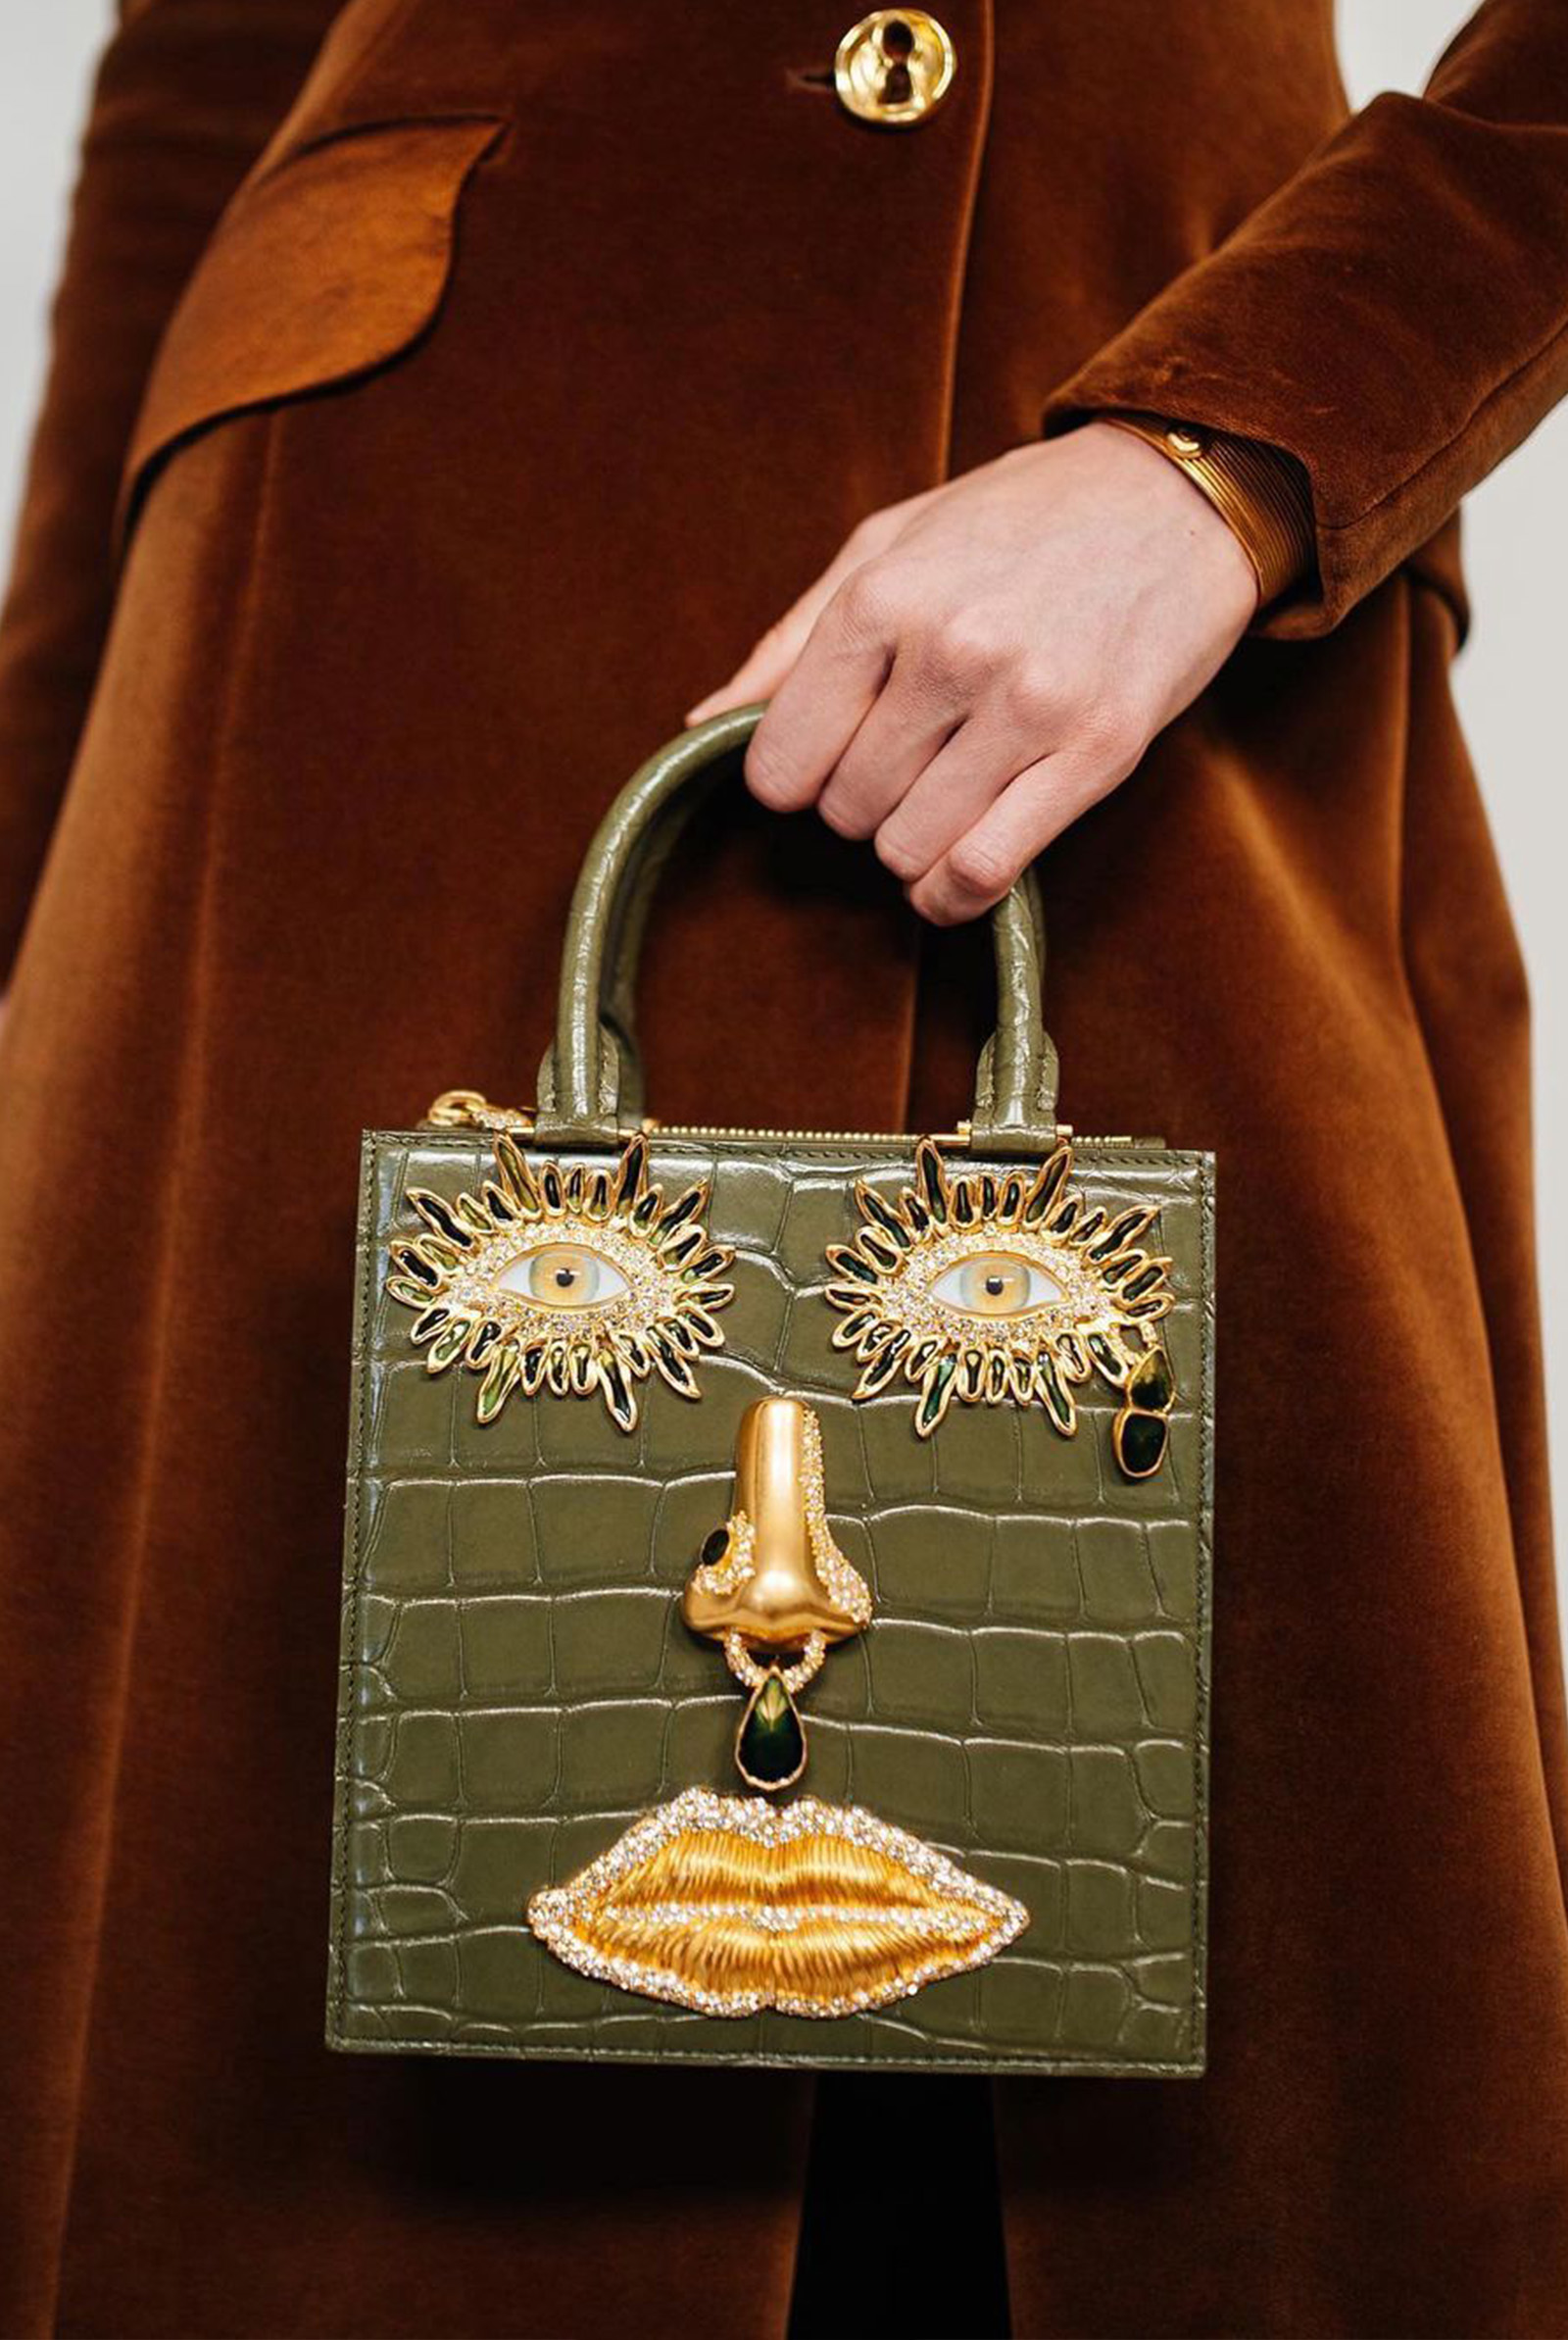 5 Novelty Bags That You Need in Your Collection